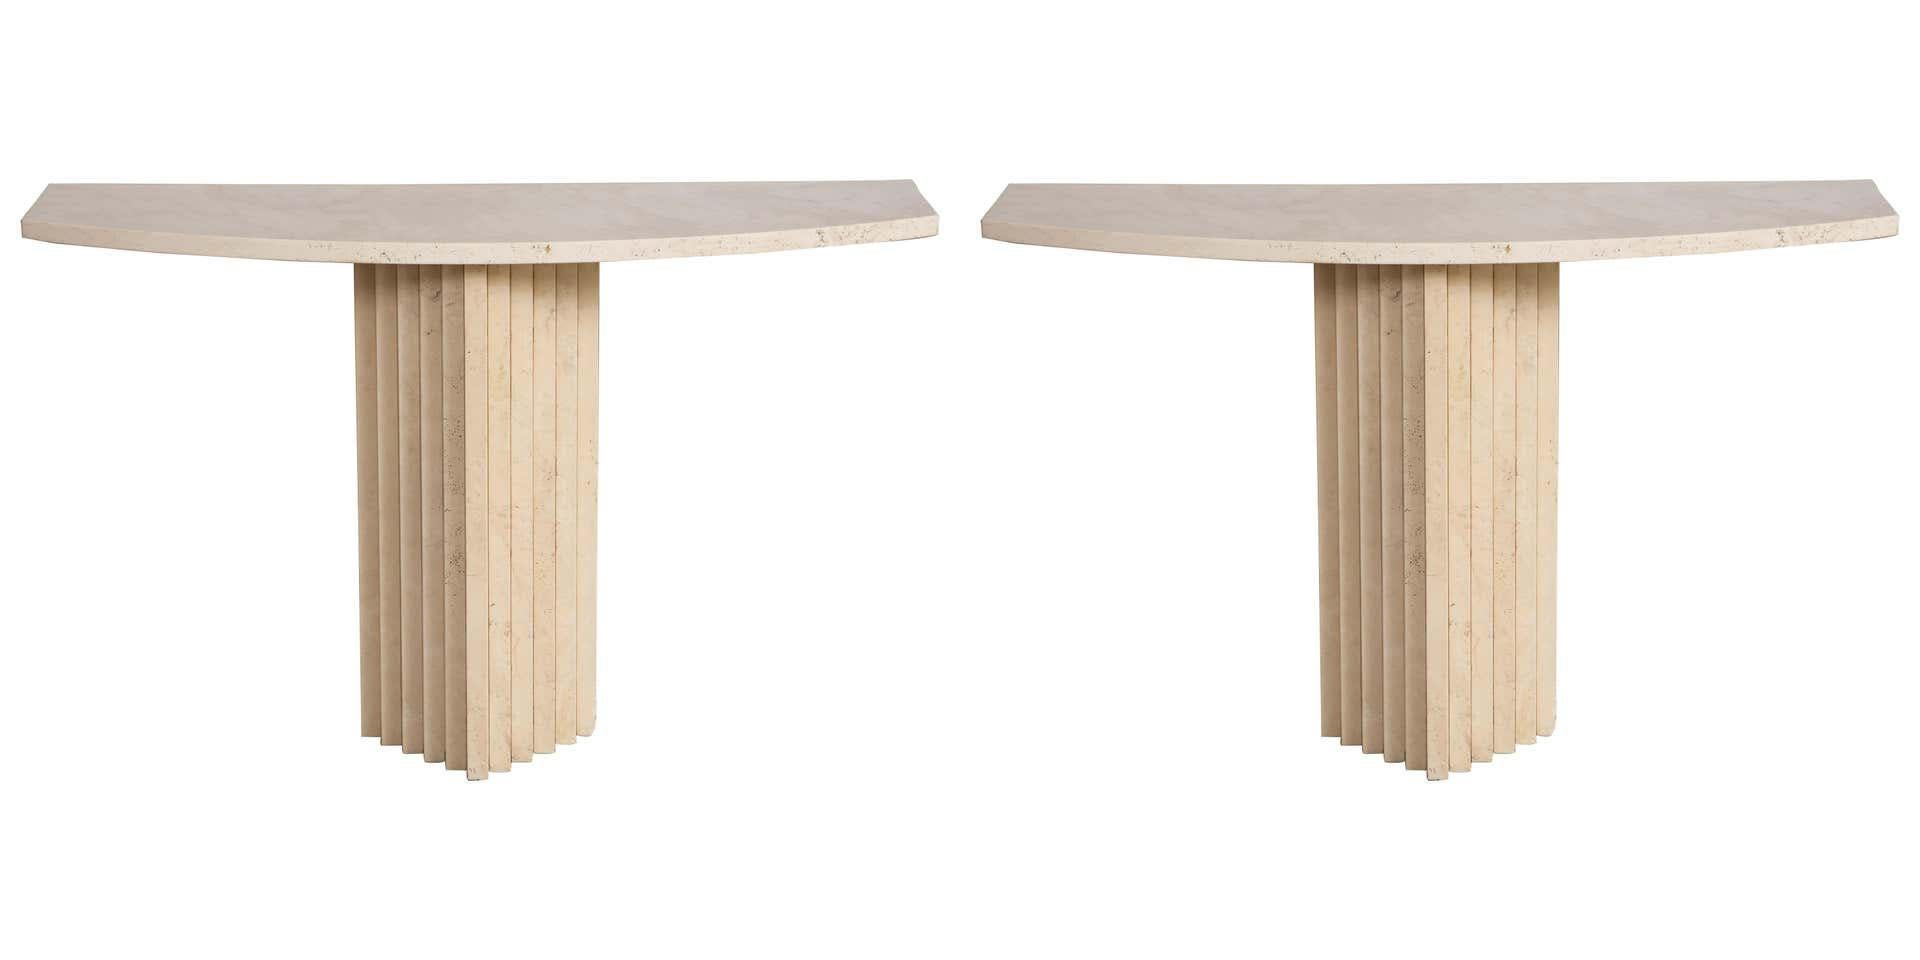 Pair of Italian 1970's travertine console tables with carved stepped pedestal supporting the shaped top.
Rome, Italy, late 1970's
Size: 29 3/4